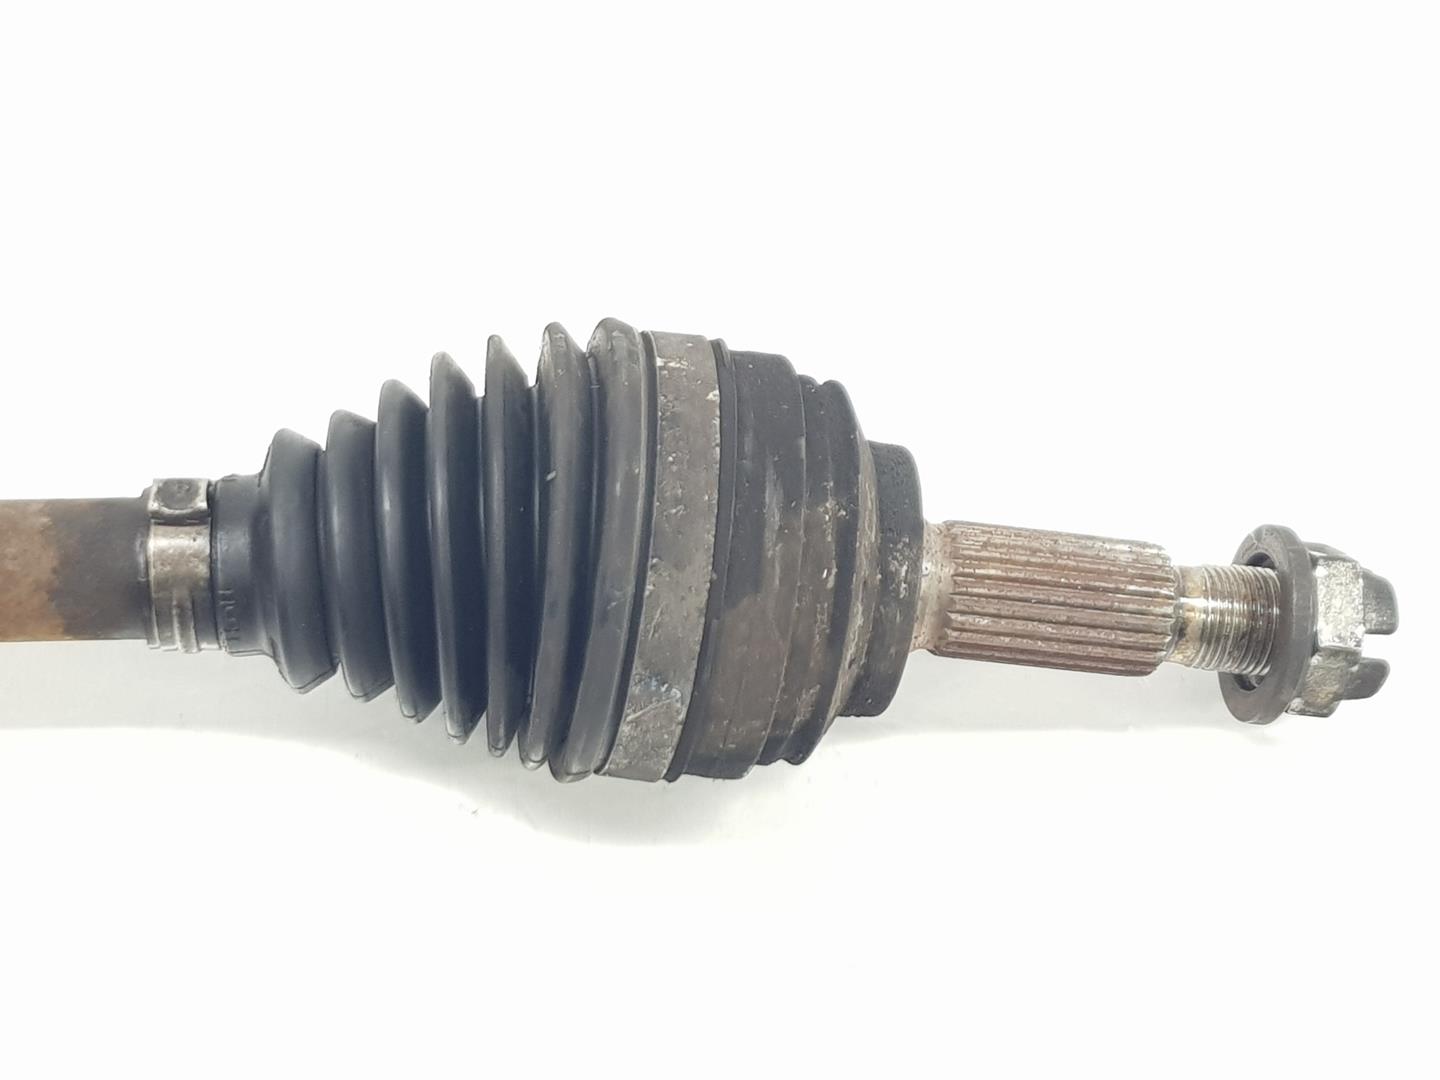 RENAULT Clio 3 generation (2005-2012) Front Right Driveshaft 391008239R, 391008239R 19797146